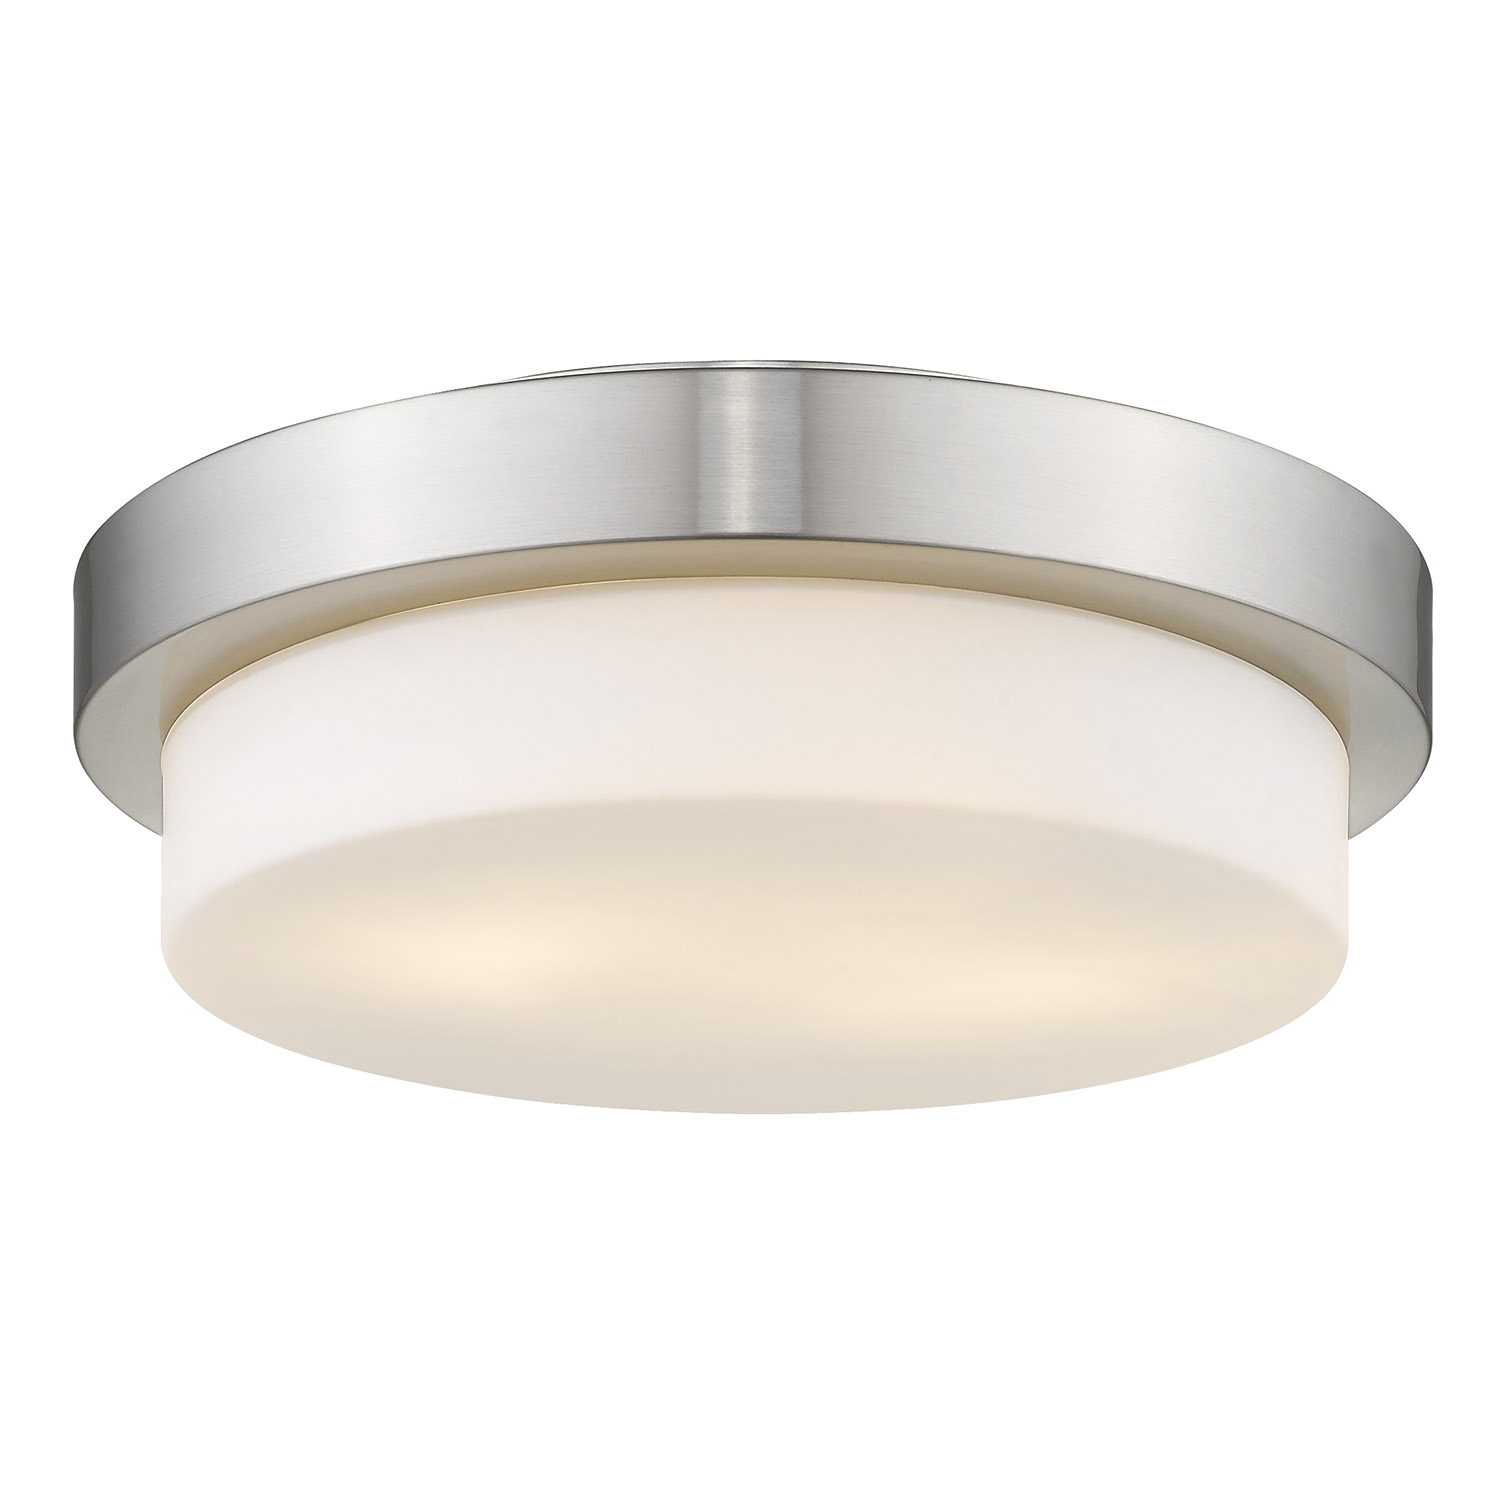 Golden Lighting-1270-13 PW-Multi-family - 2 Light Large Flush Mount in Variety of style - 4.25 Inches high by 13 Inches wide Pewter  Pewter Finish with Opal Glass